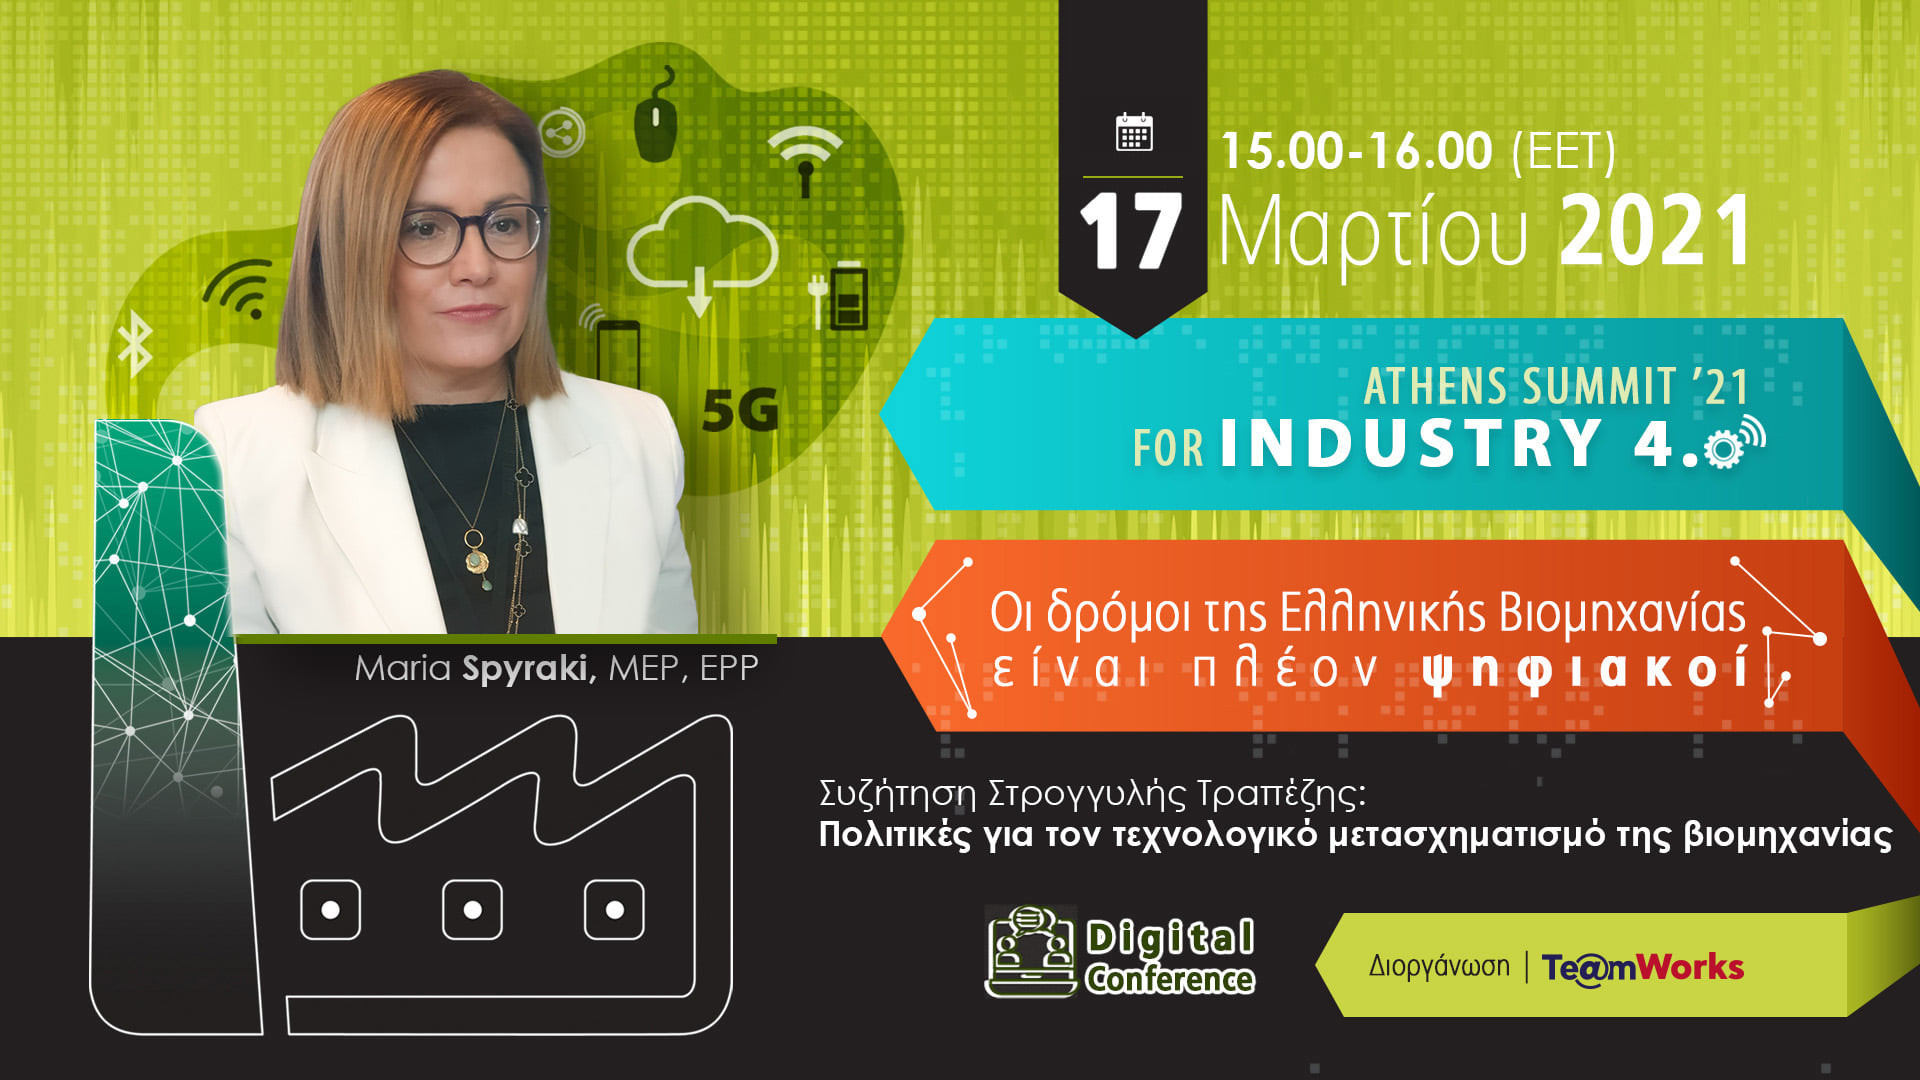 Athens Summit '21 For Industry 4.0